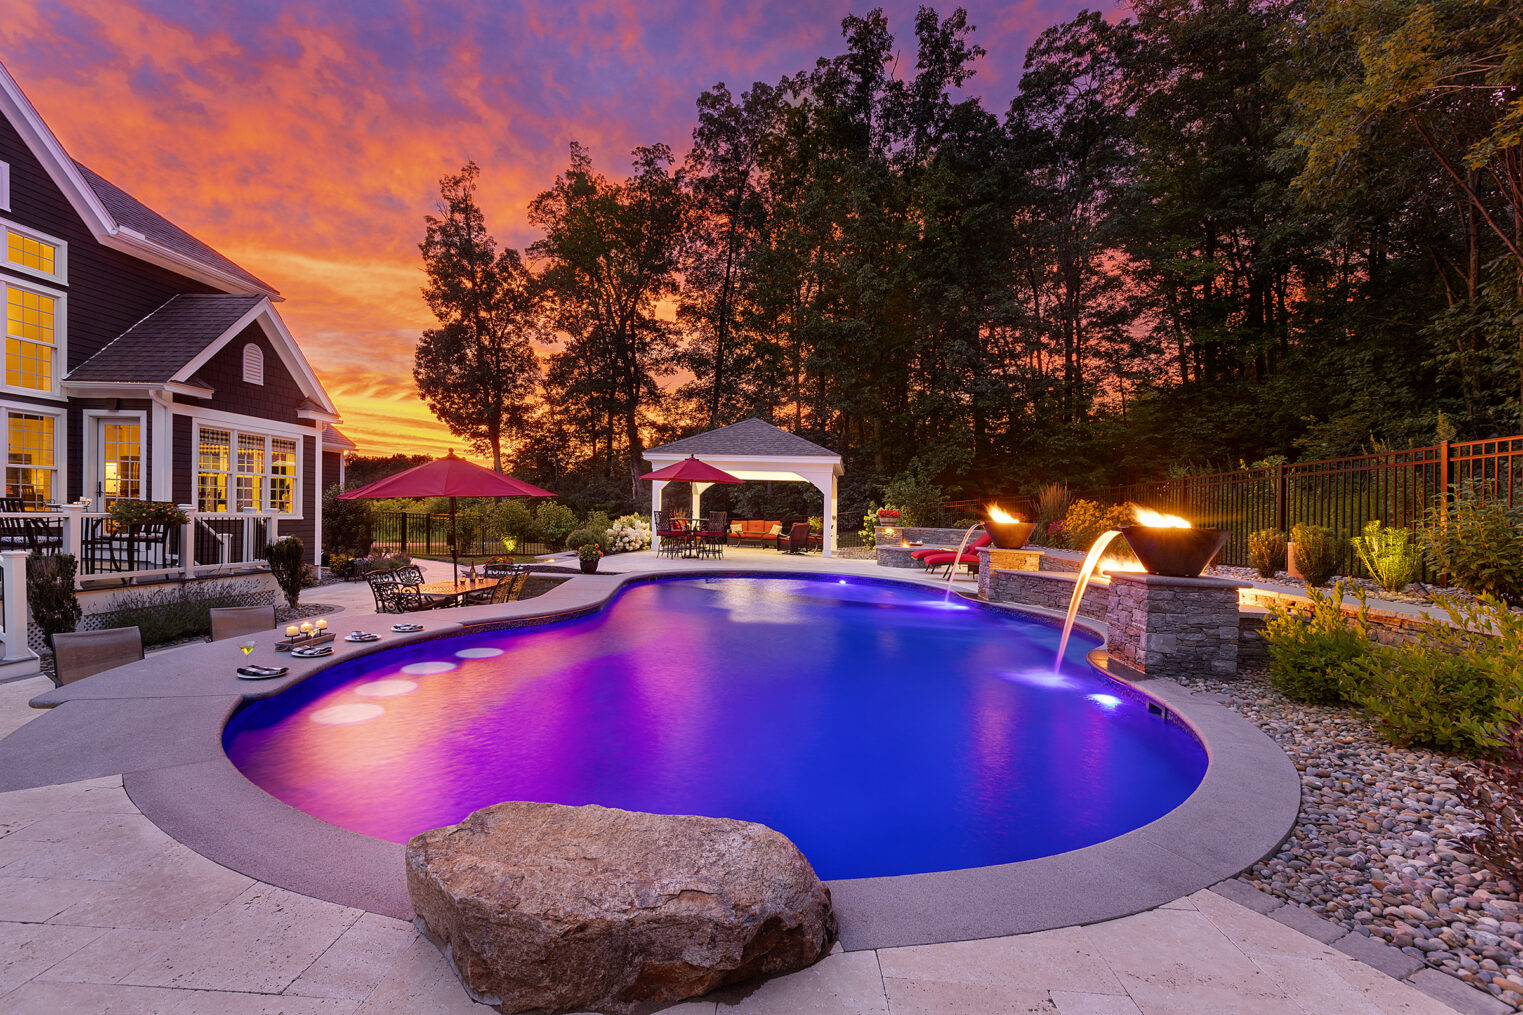 Sunset by the pool in Sterling, MA. Pool deck with water/fire features and a jump rock. Built by Dex by Terra.